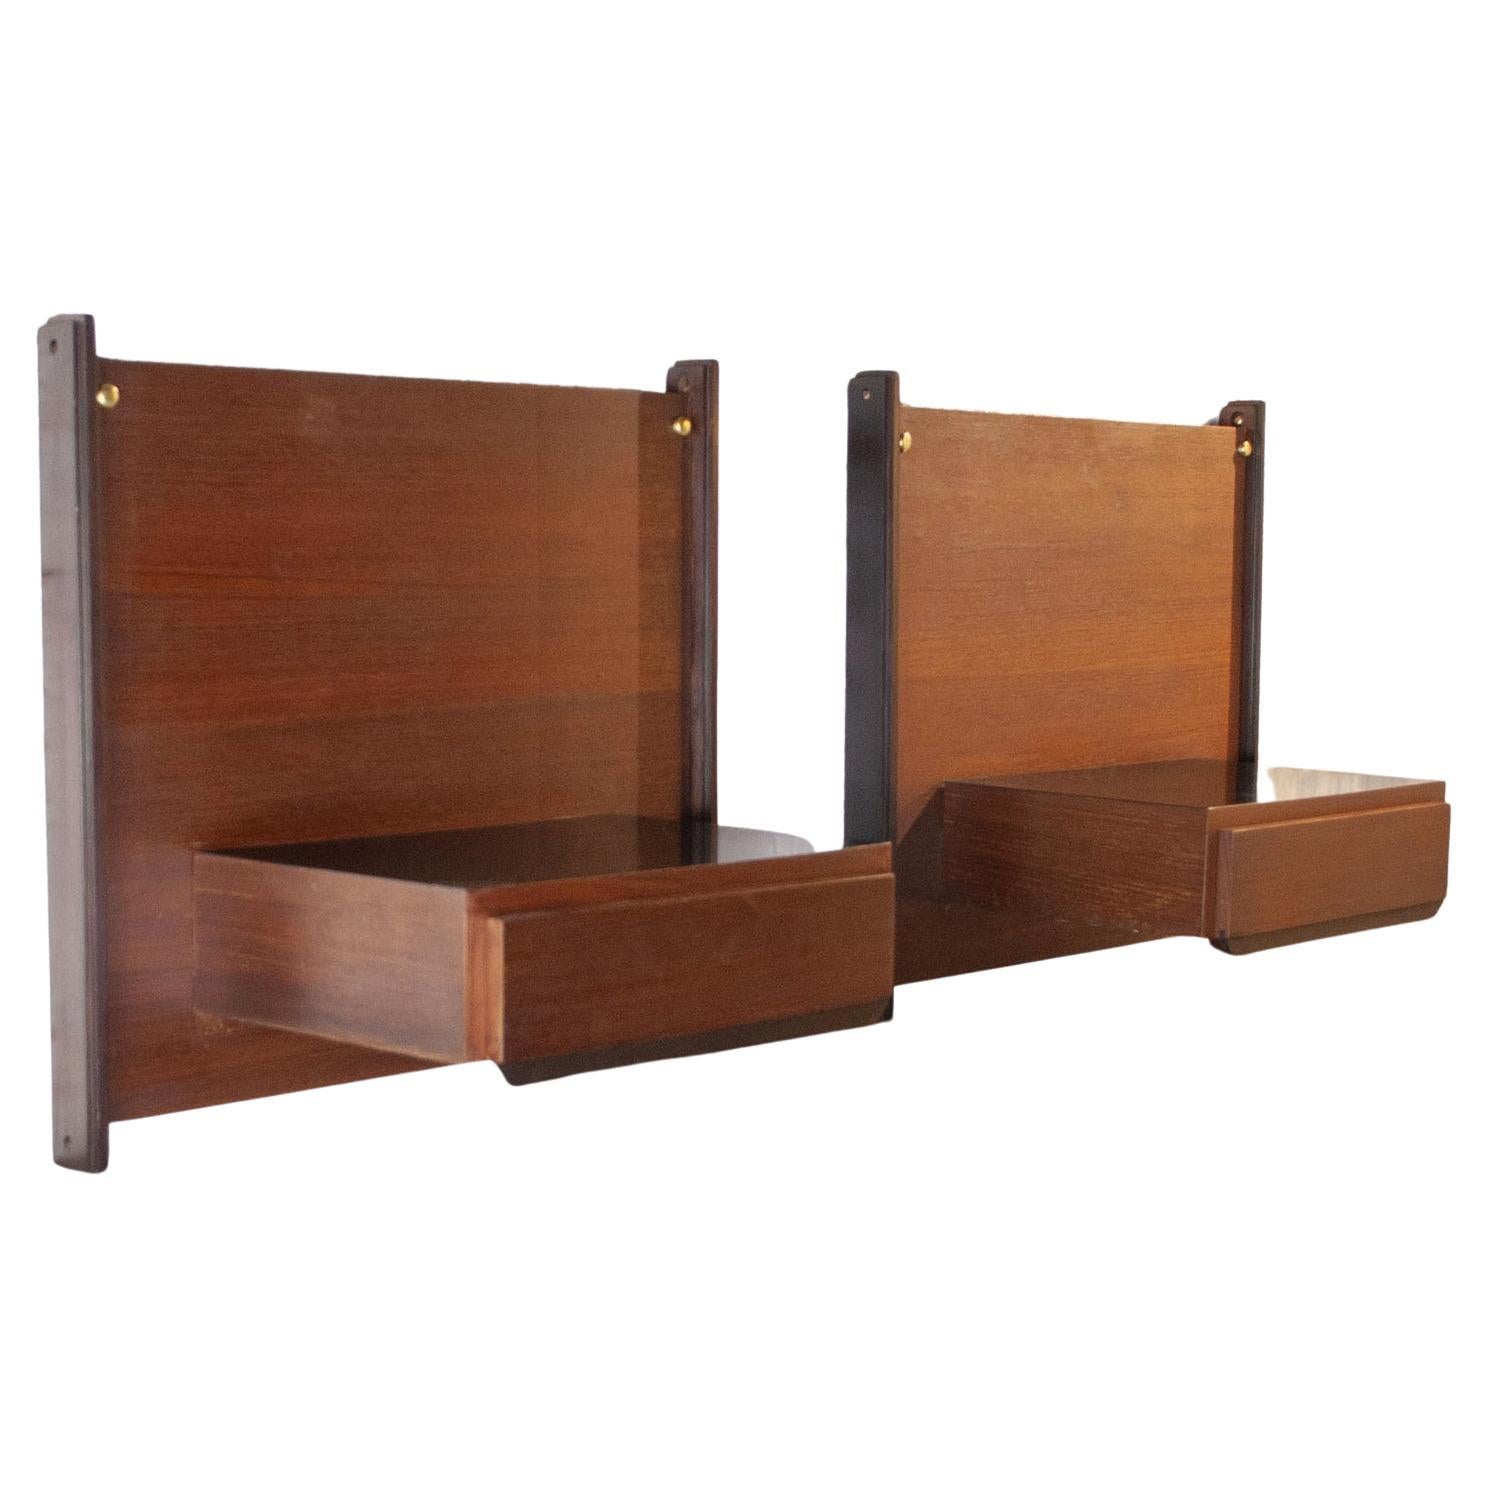 Pair of wall-mounted night stands with one drawer. Italian production late 1960s in the style of Ico Parisi.

Ico Parisi was born in Palermo in 1916. He gained a diploma in construction and served his apprenticeship in Giuseppe Terragni's studio.